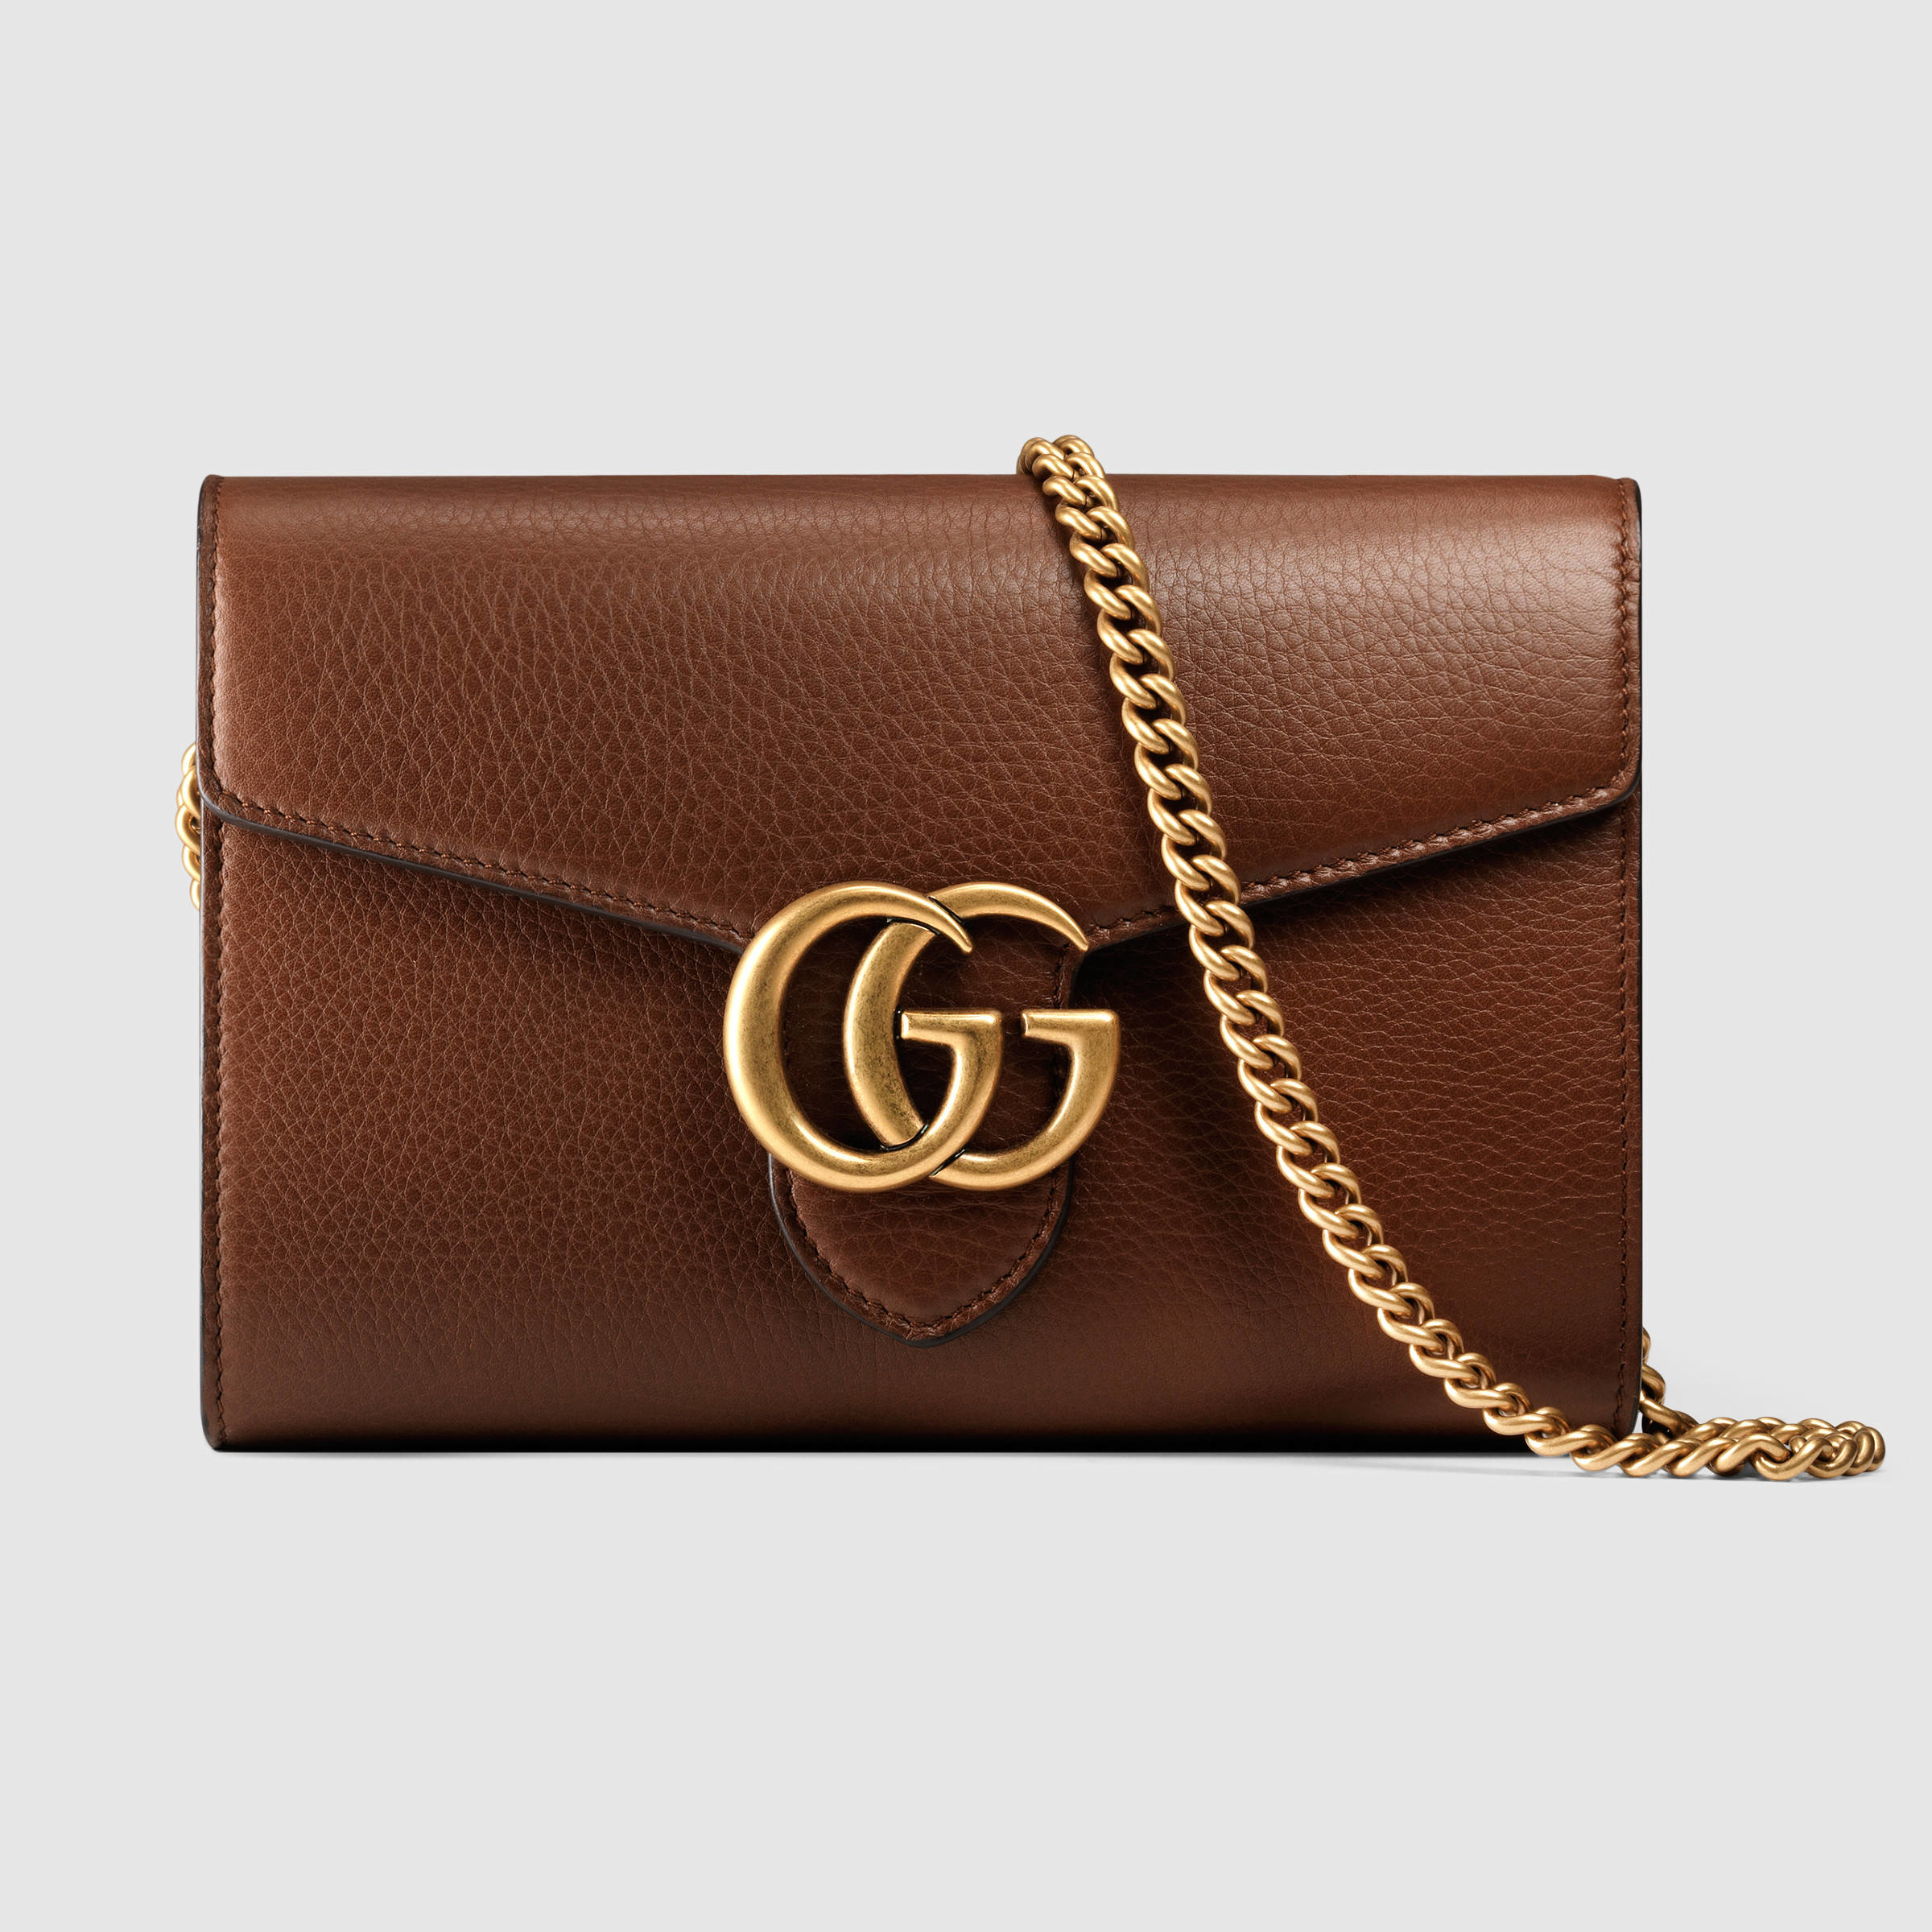 Gucci GG Marmont Leather Mini Chain Bag in Brown | Lyst